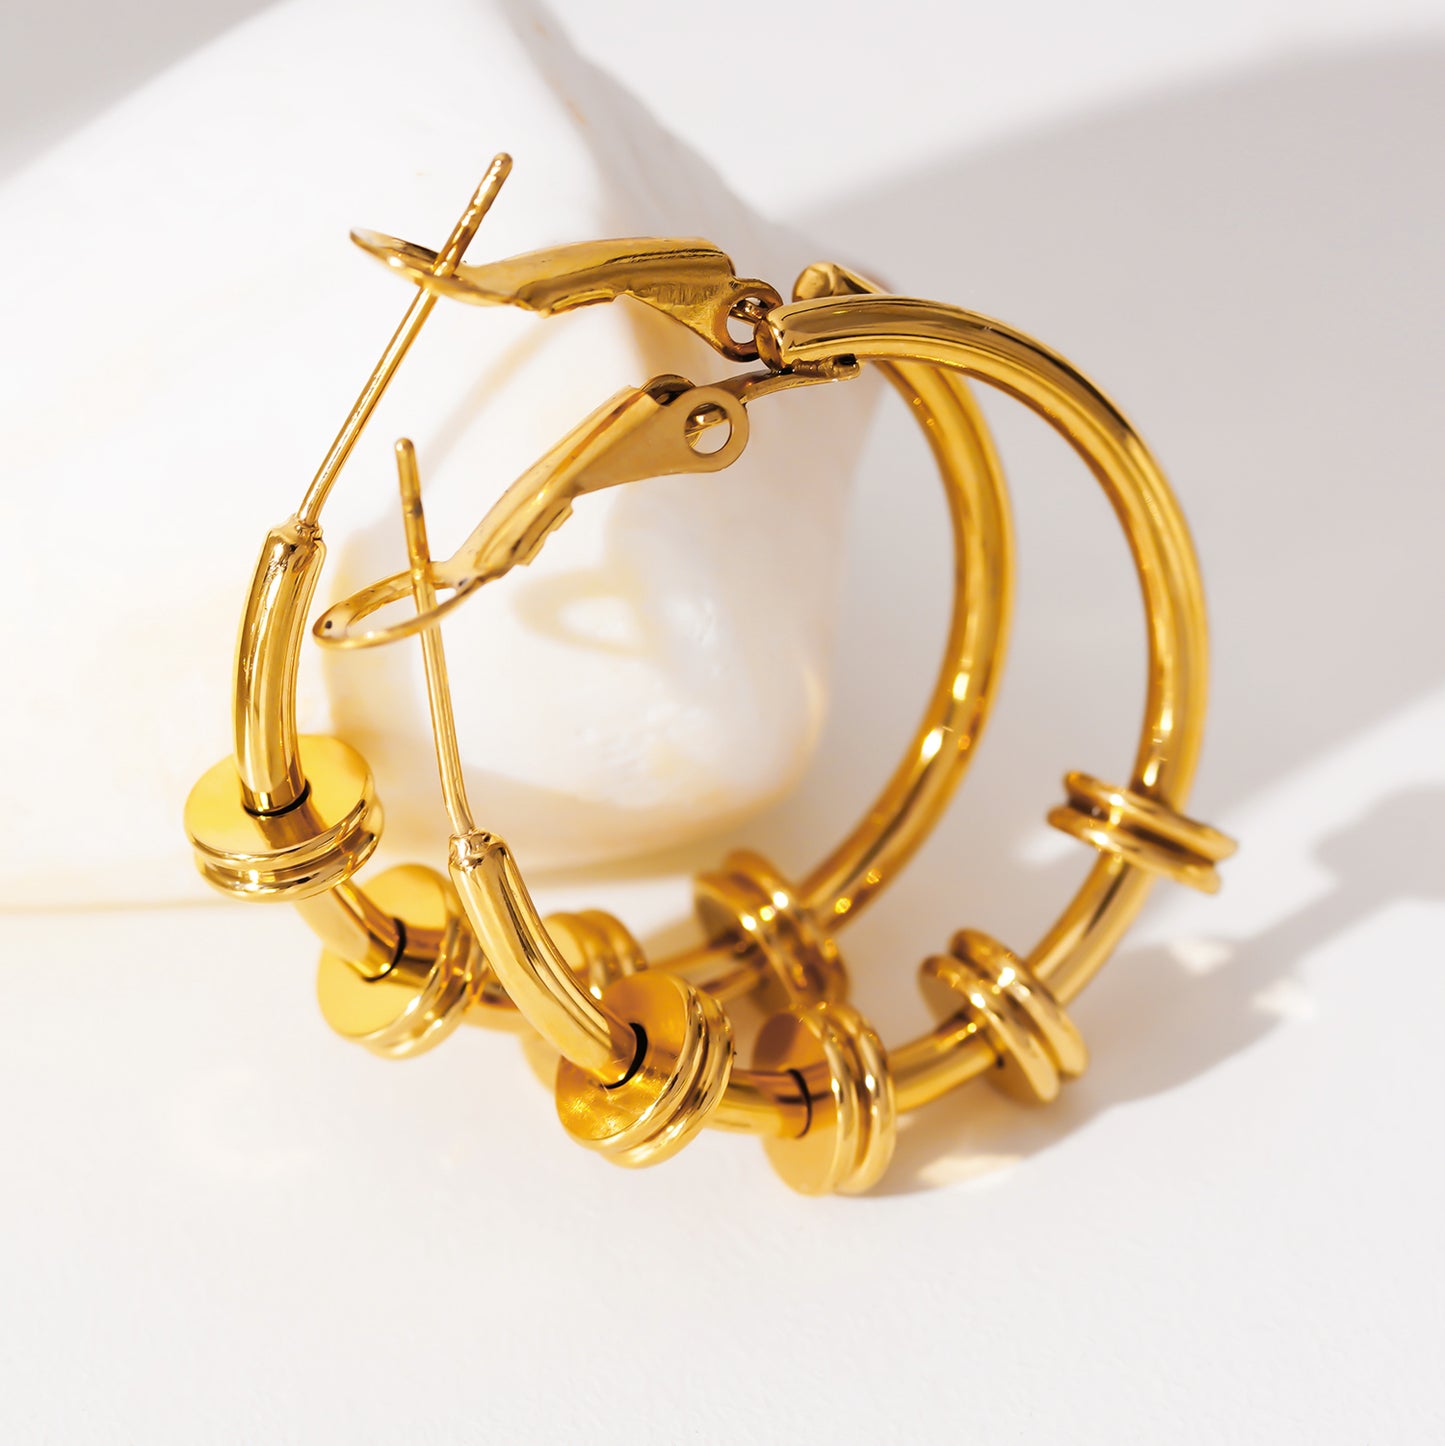 Style MINATO 5336: Modernist Hoop Earrings Anchoring Industrial-Chic Double Discs.